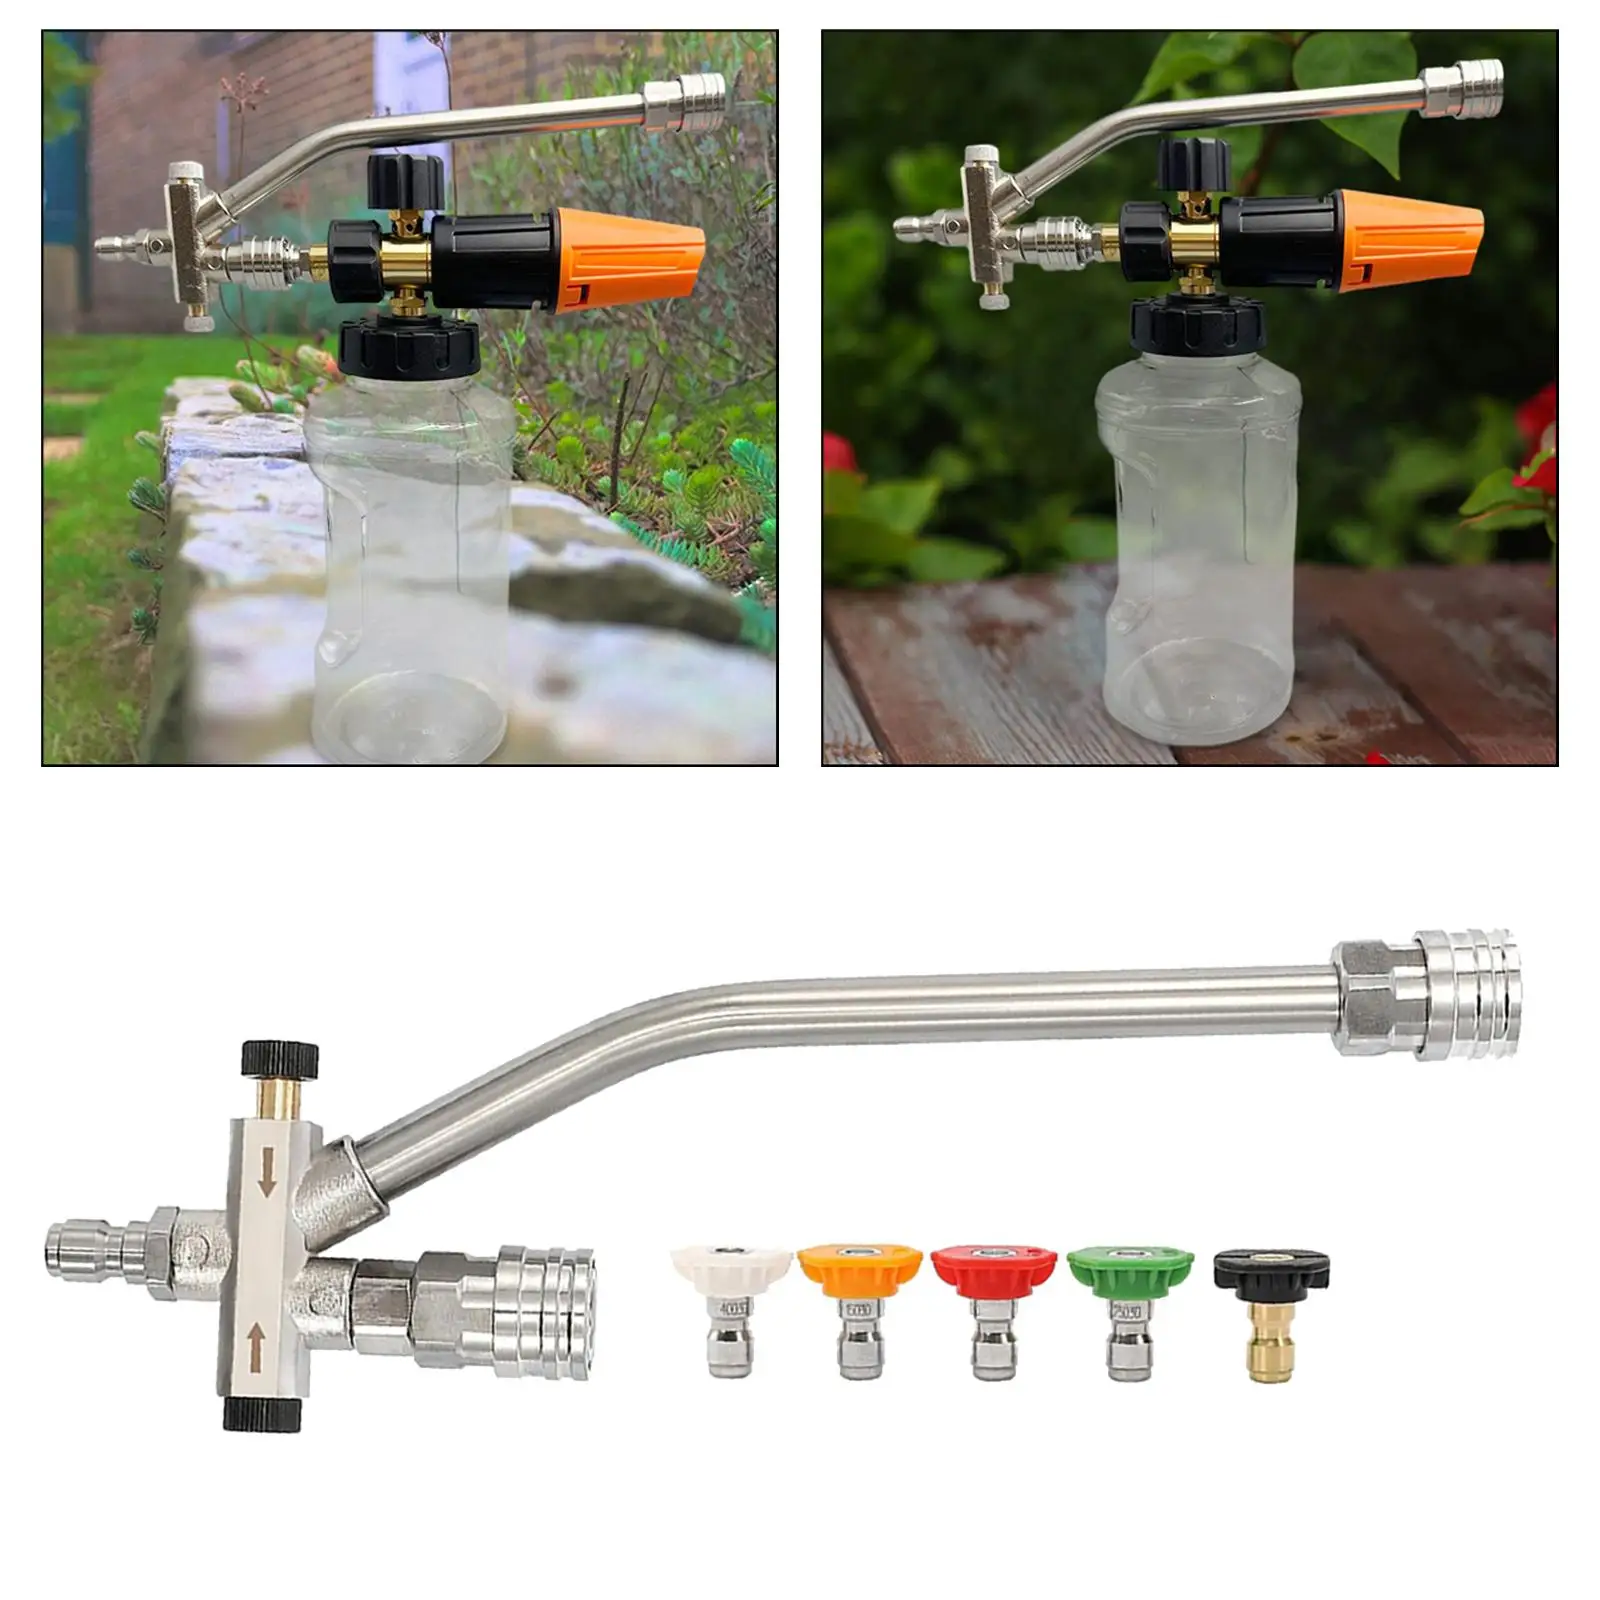 Dual Connector Accessory, Dual Valves Foam Spray Nozzles, Pressure Washer Double Tip Attachment